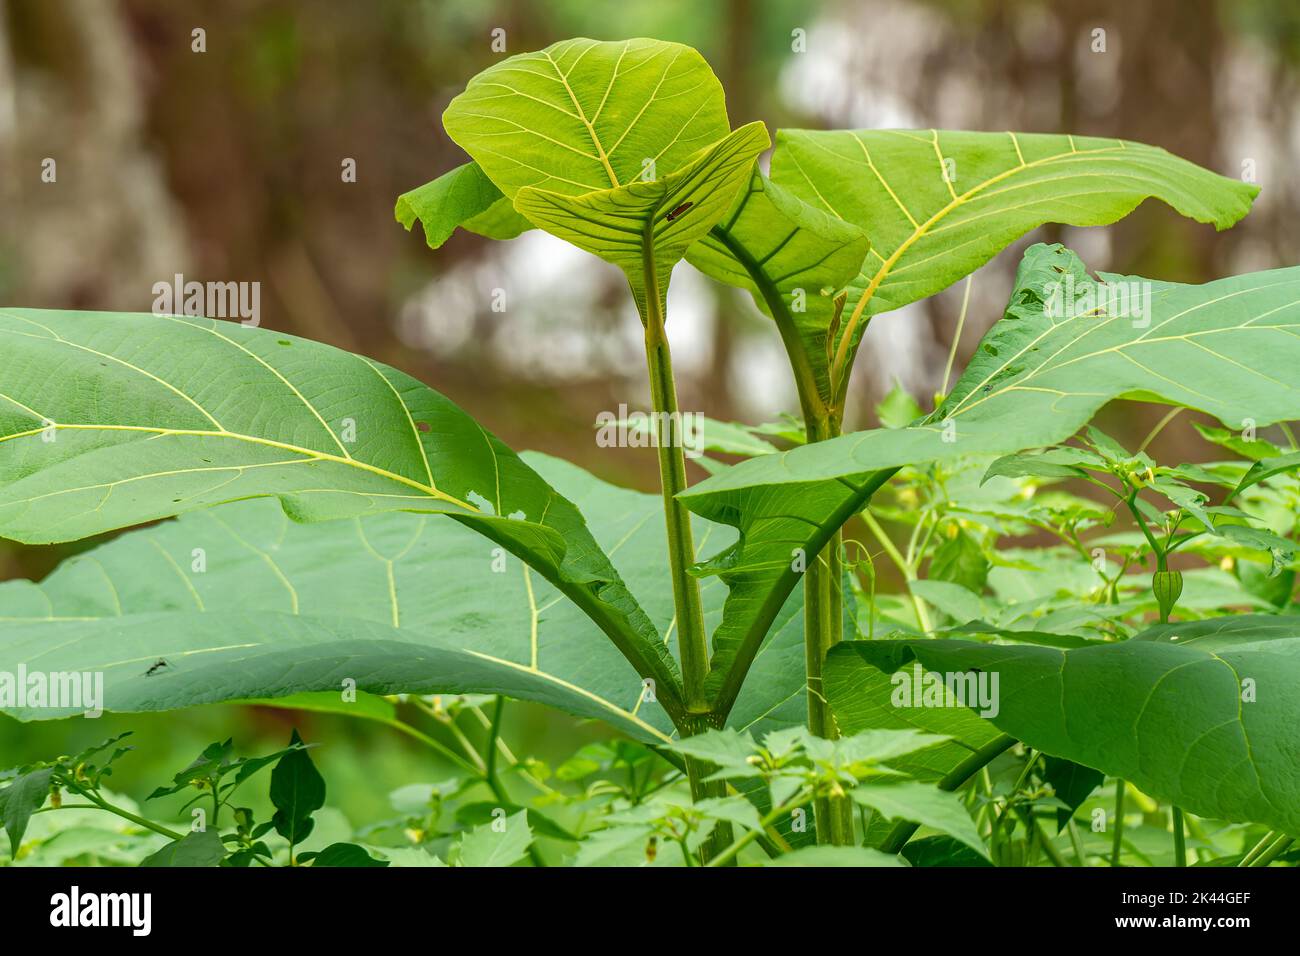 Green teak tree shoots, the young part is slightly brownish, the green grass background is blurry Stock Photo